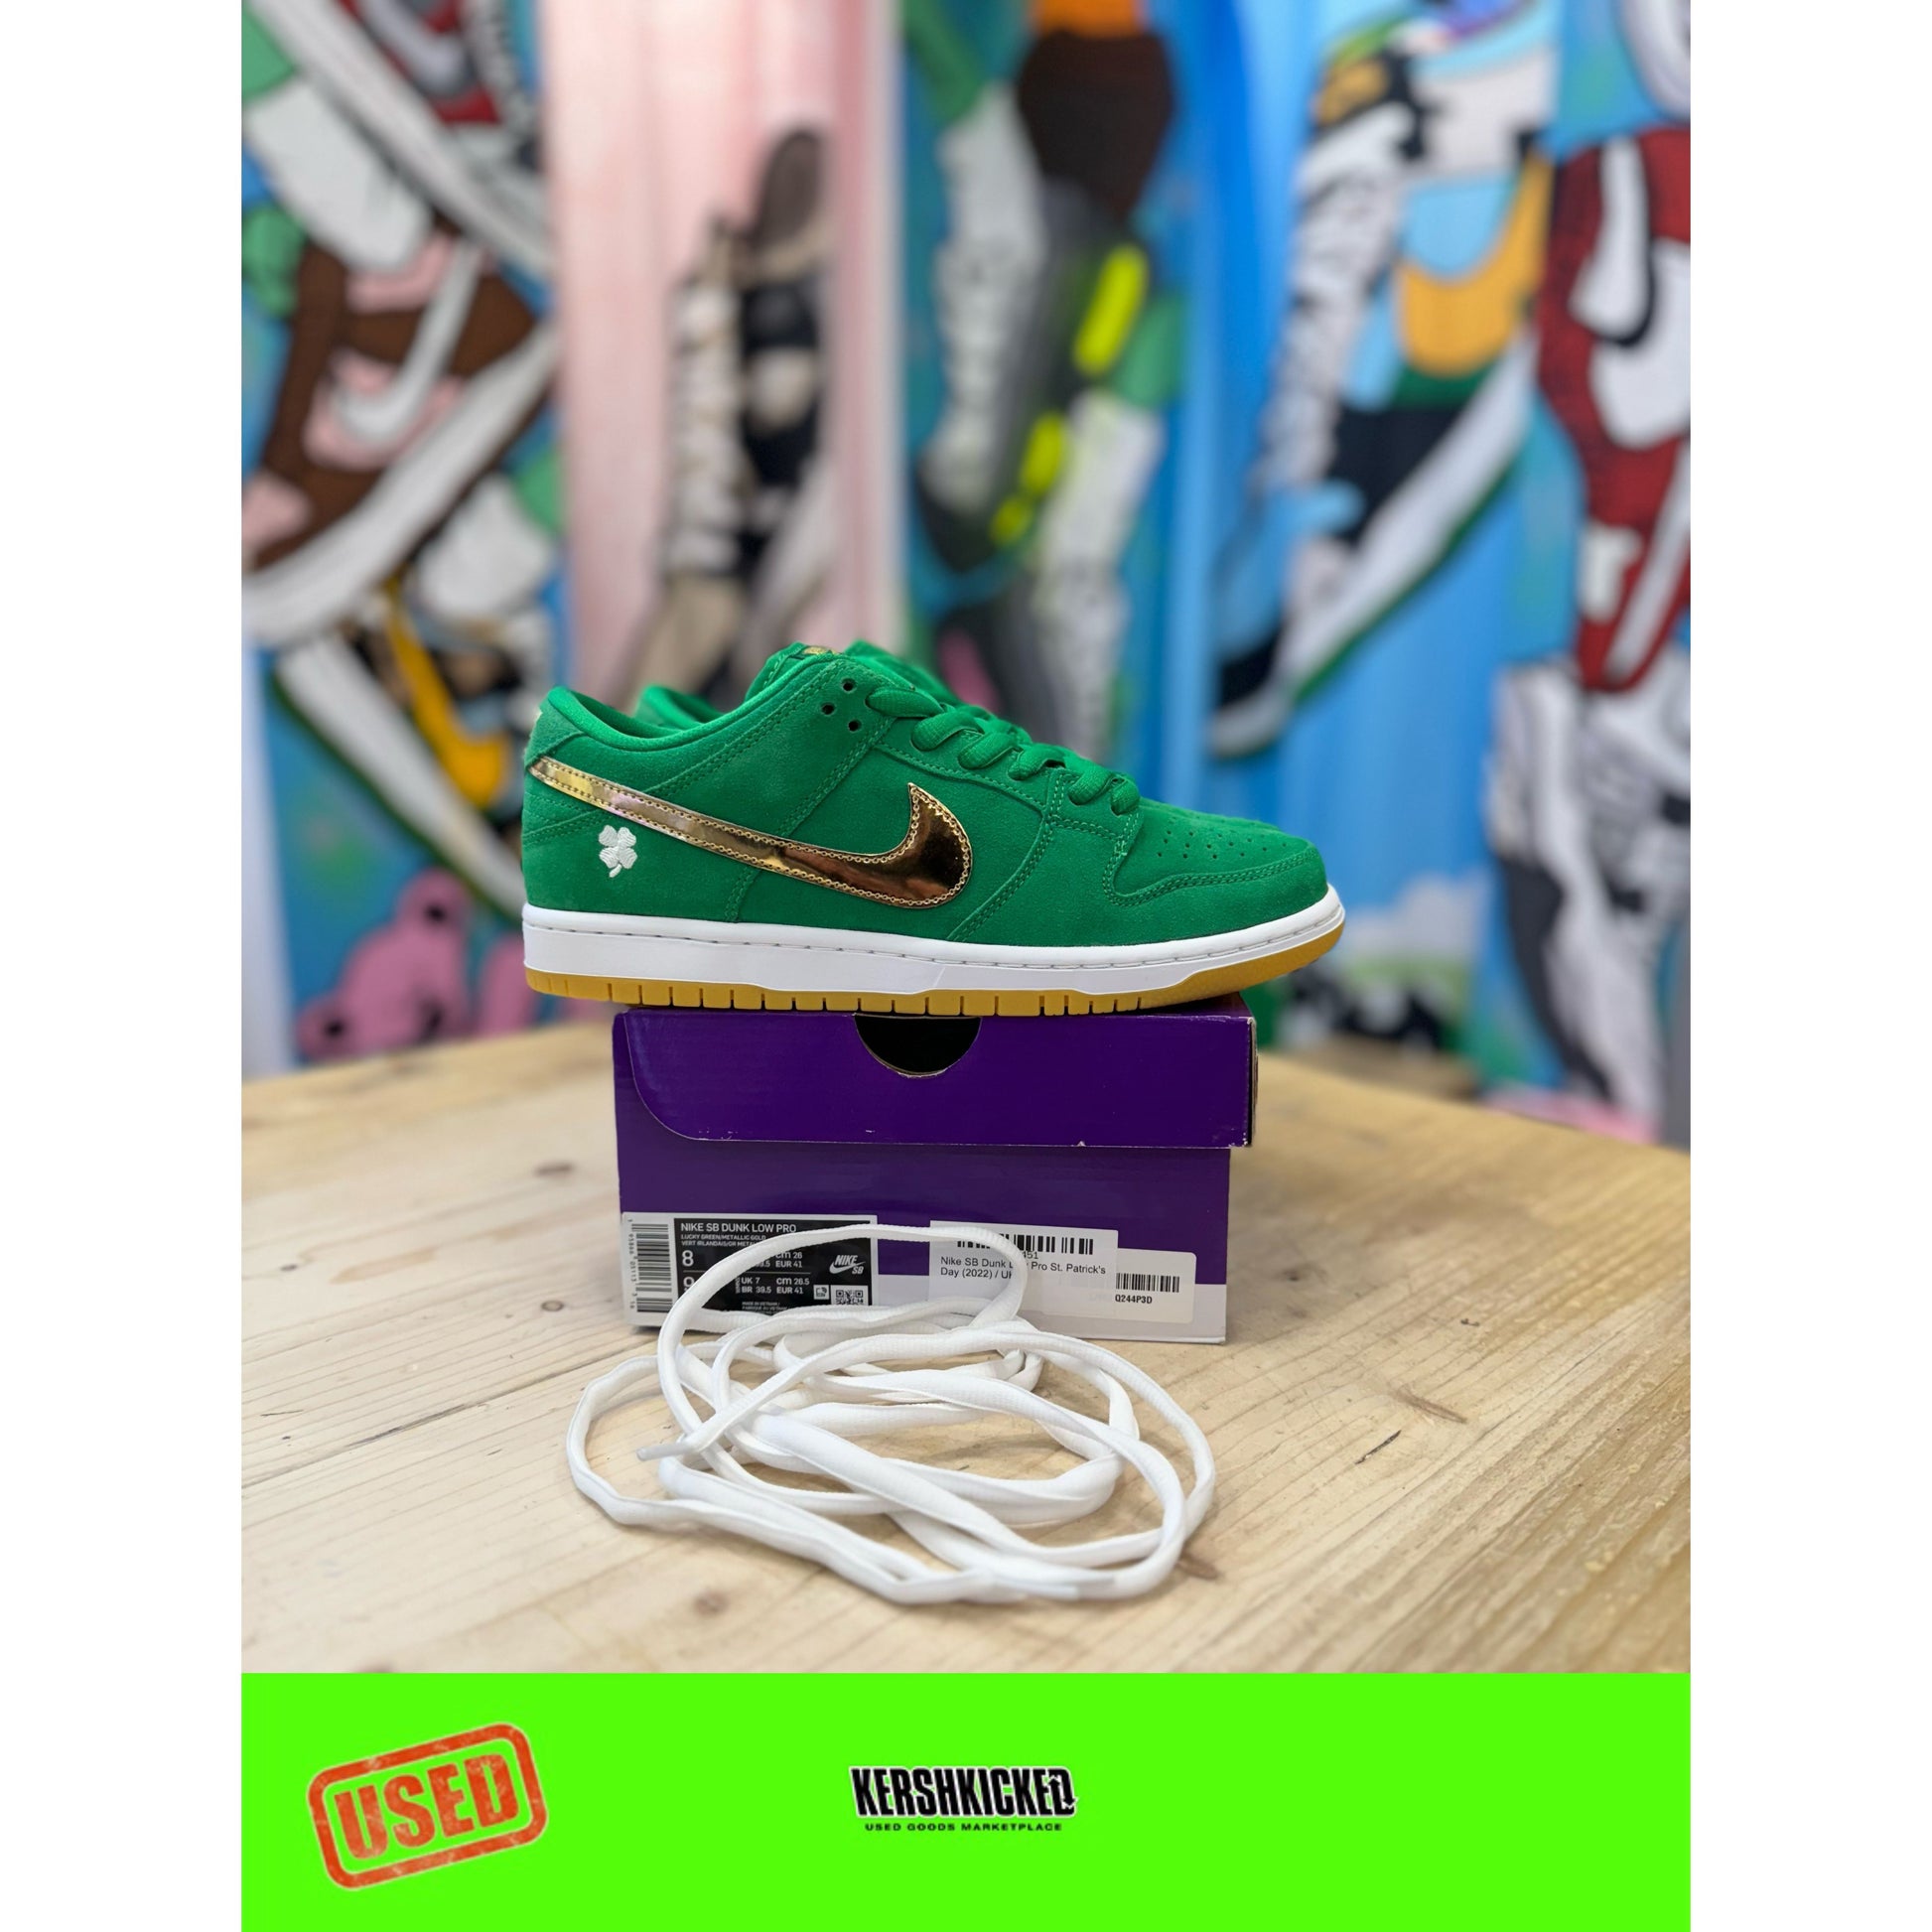 Nike SB Dunk Low St. Patricks's Day UK 7 by Nike from £150.00